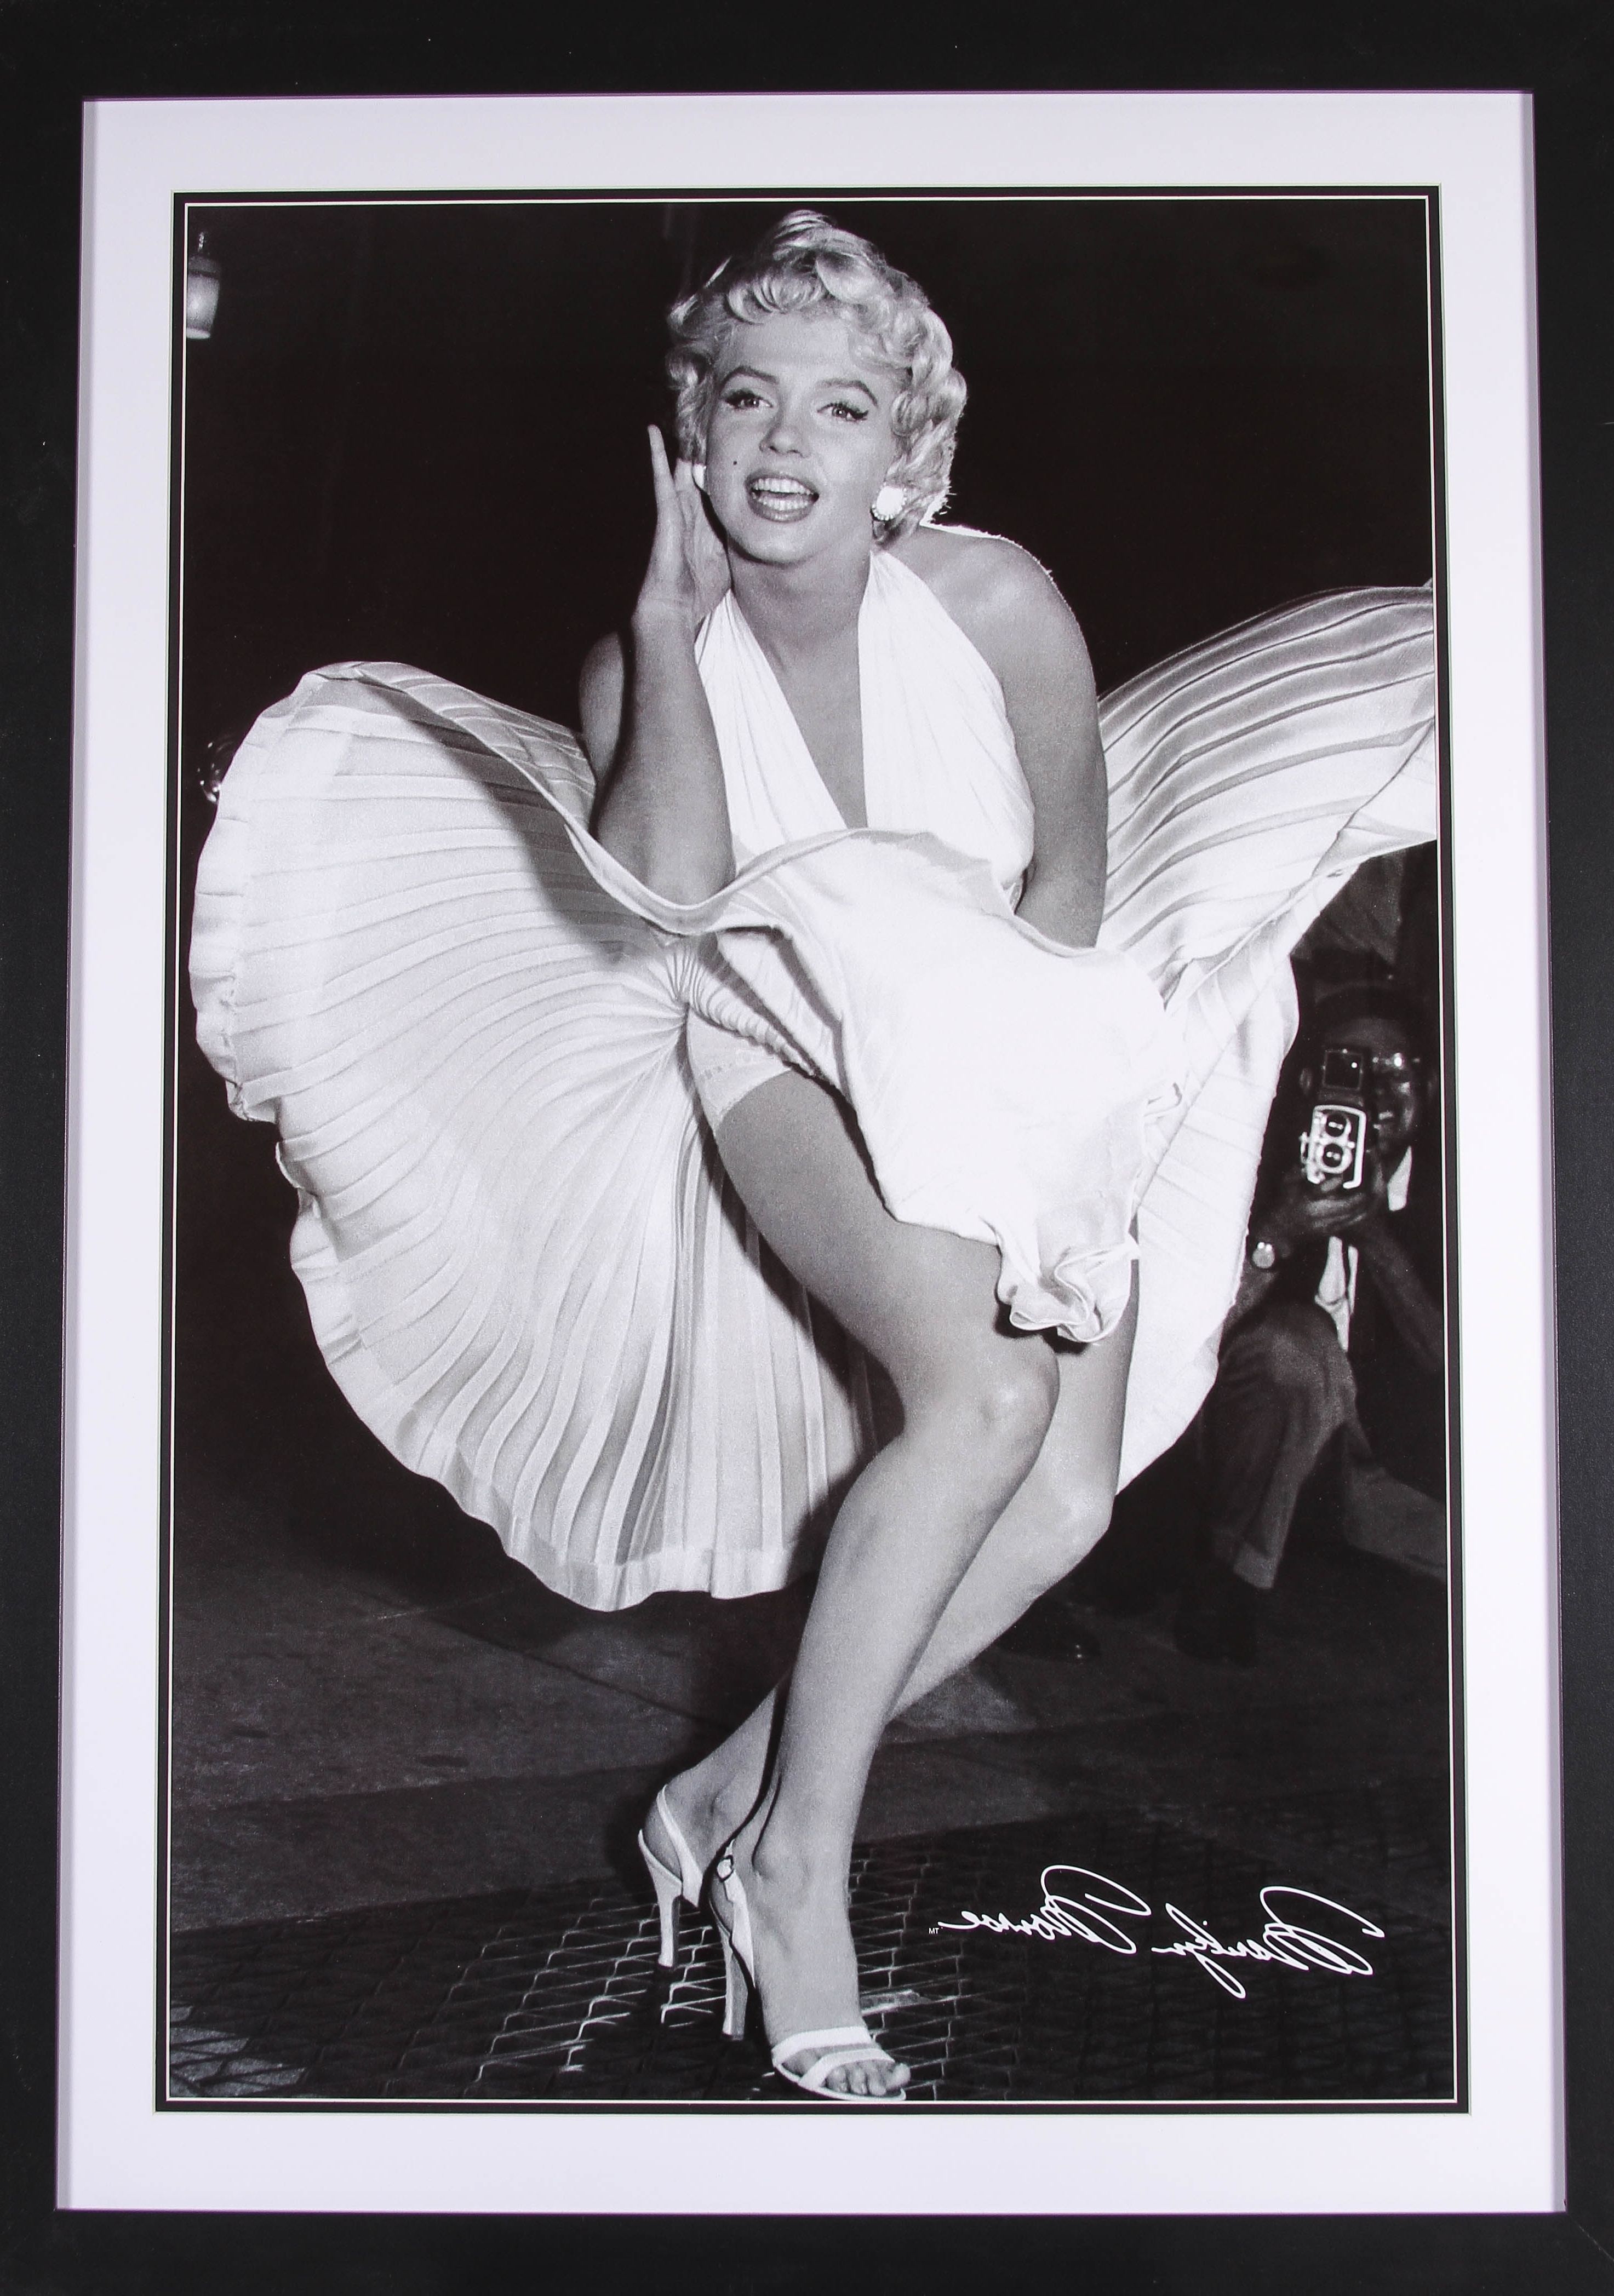 Best And Newest Marilyn Monroe Framed Wall Art Intended For Home Accessories: Marilyn Monroe Framed Pictures And Marilyn (View 1 of 15)